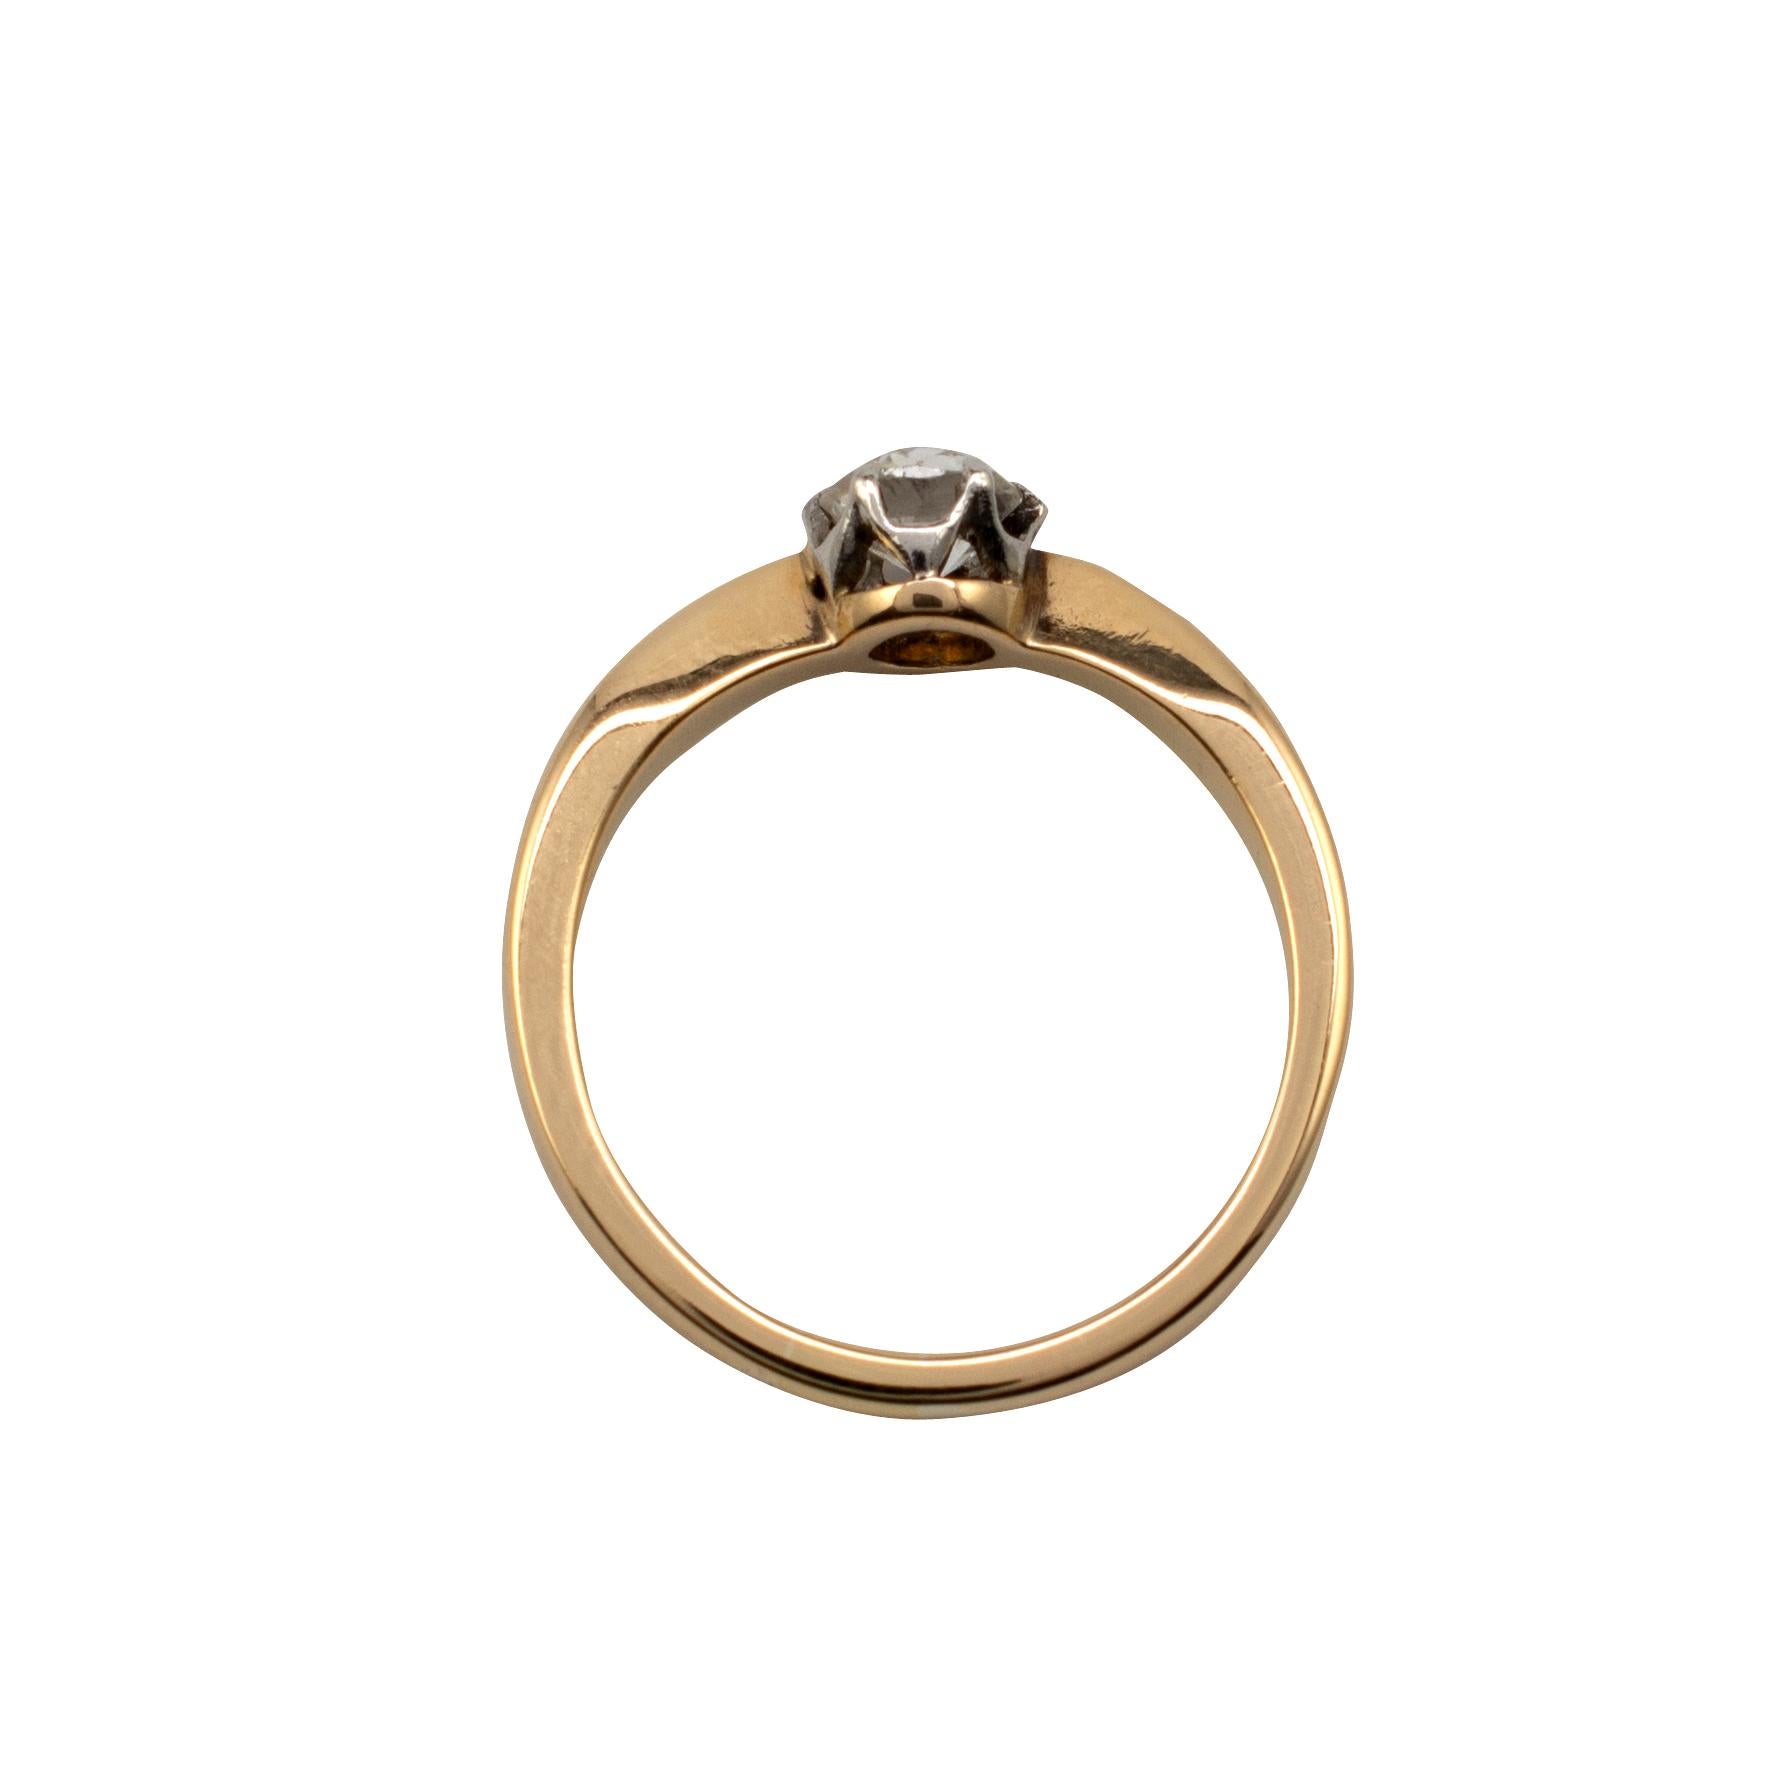 Diamond Solitaire Engagement Ring 0.50 Carat Old Cut, 18 Karat Gold, circa 1970s For Sale 5